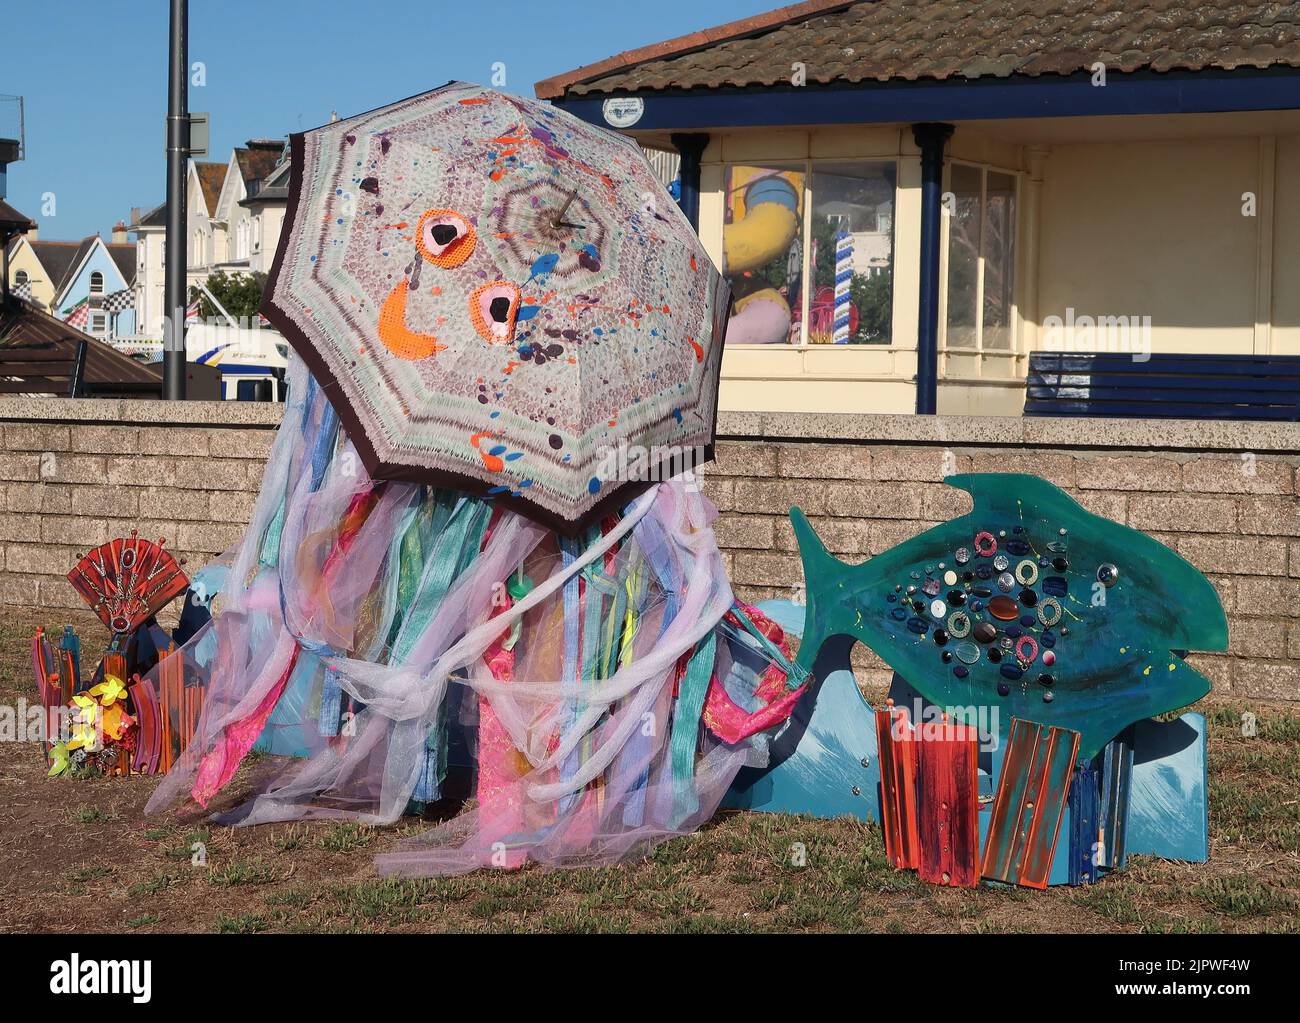 Recycled art along the seafront at Teignmouth, South Devon, using recycled materials to raise awareness of environmental issues. Stock Photo